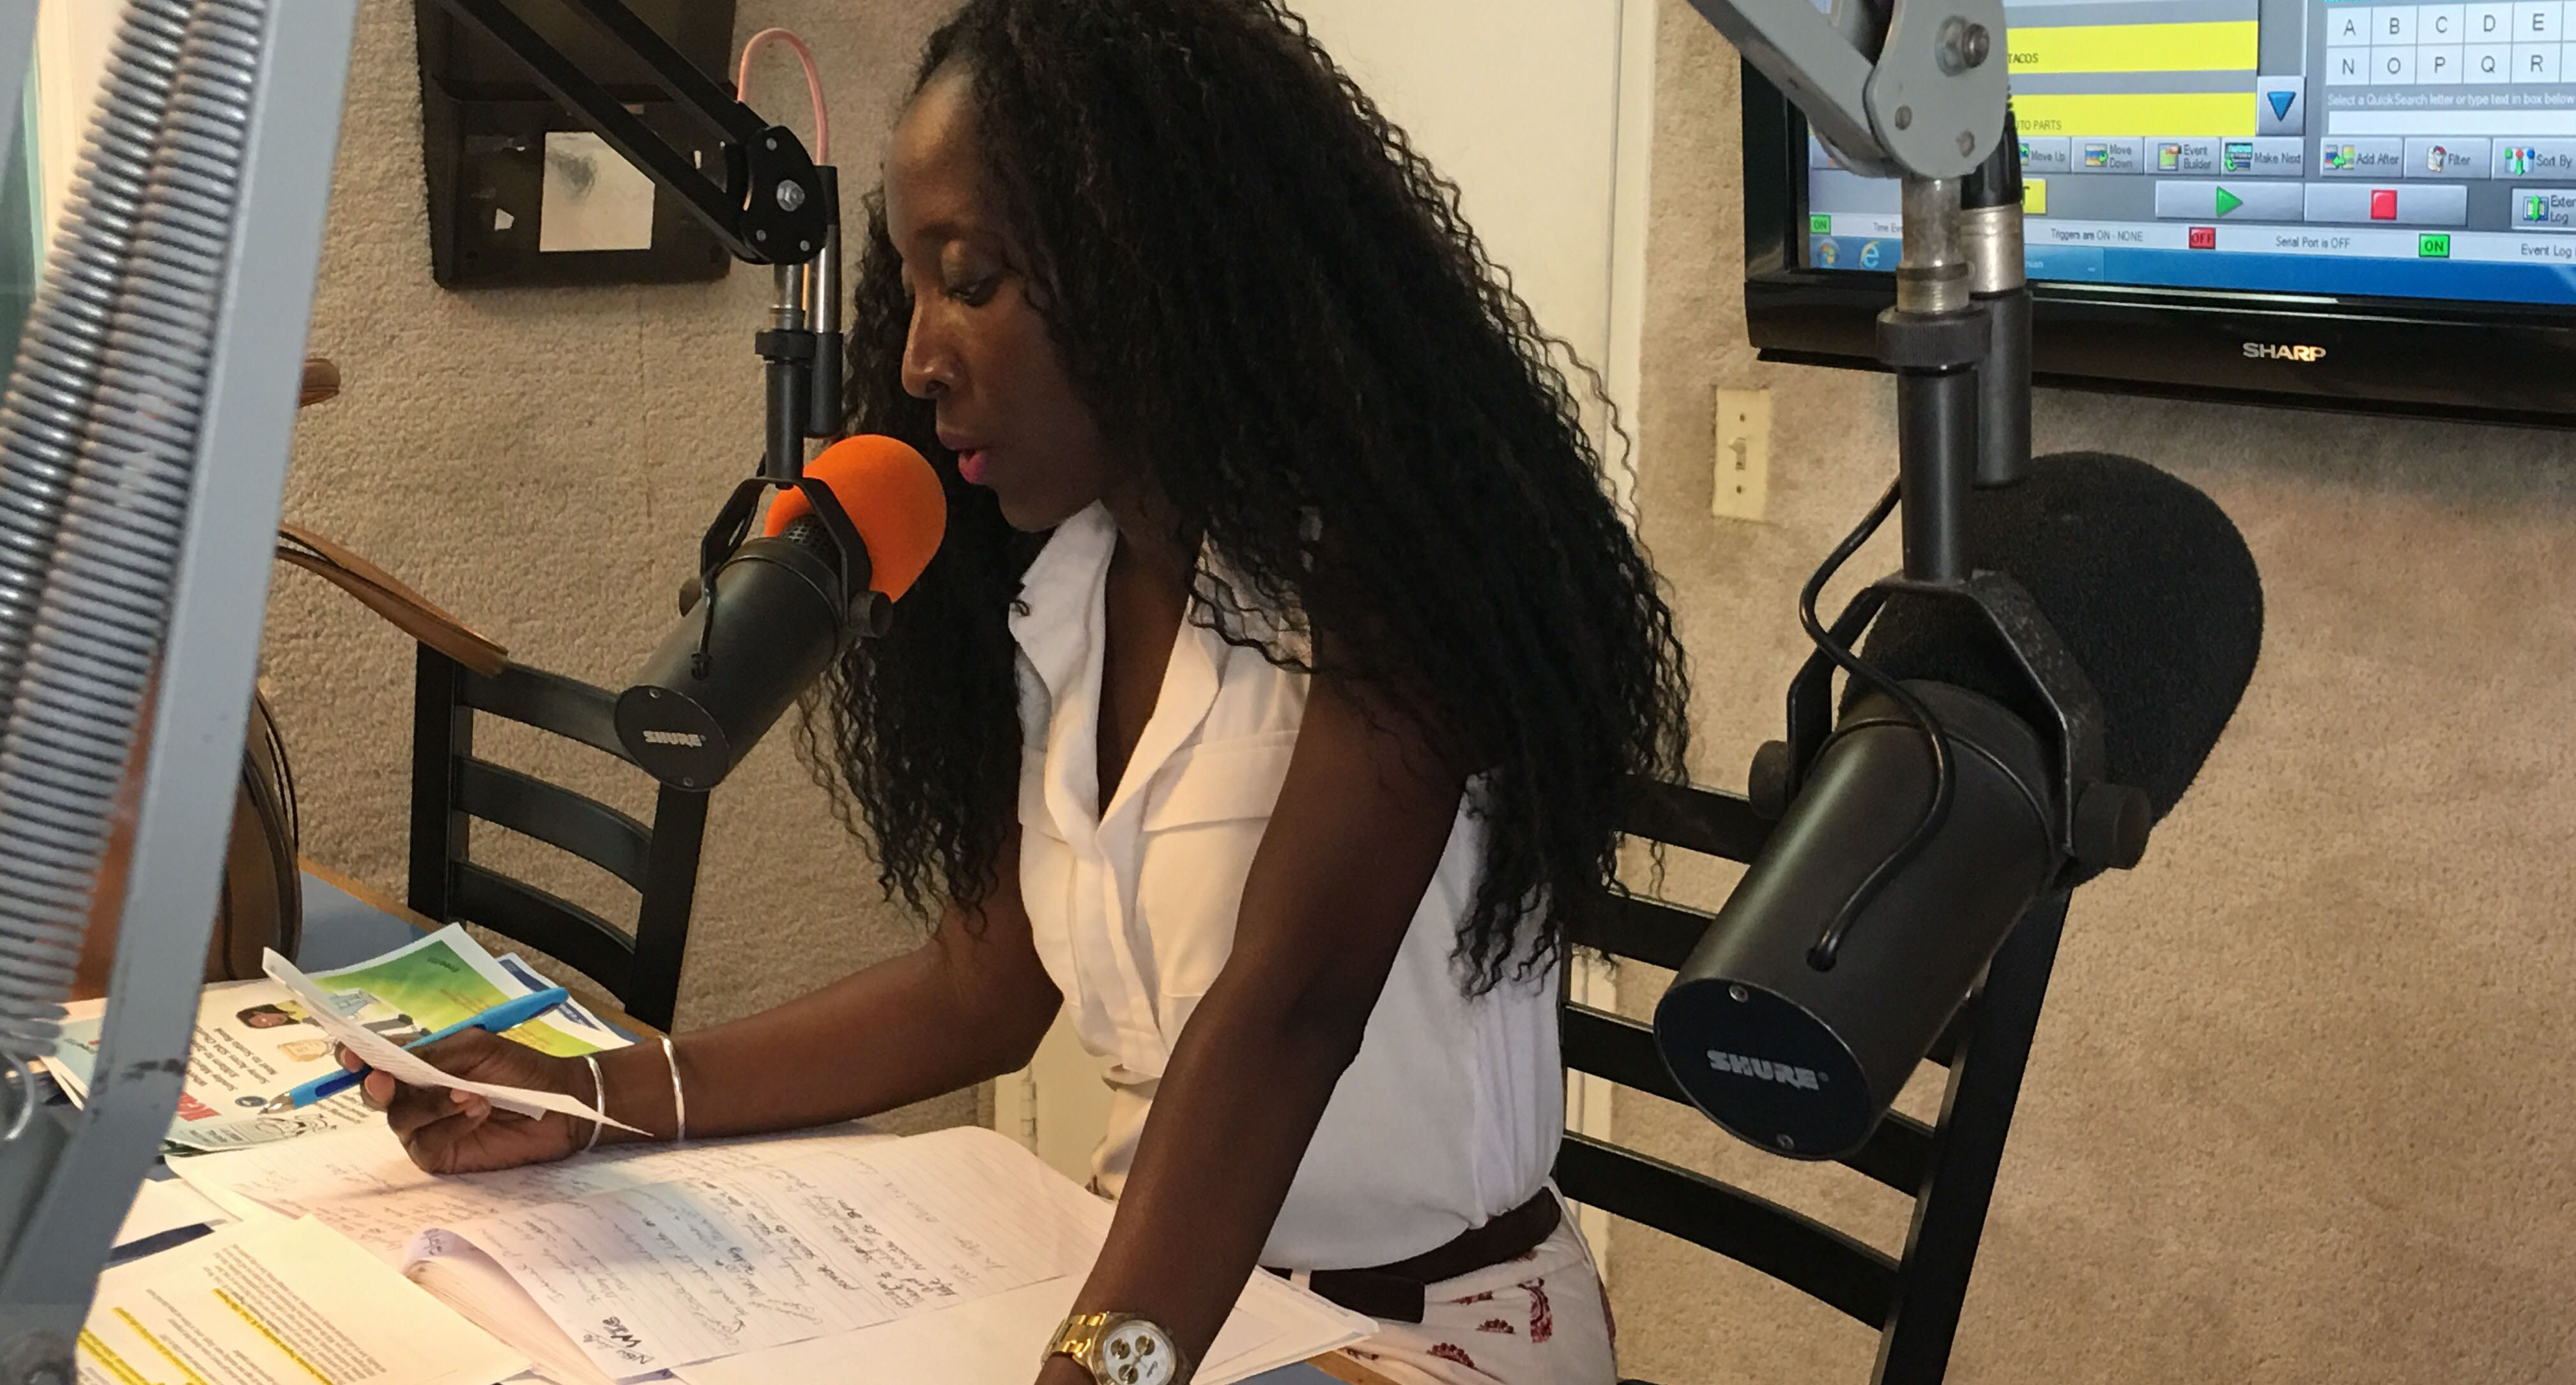 Nykole Tyson, Director of Public Relations for the US Virgin Islands Department of Health, speaking into a radio microphone.